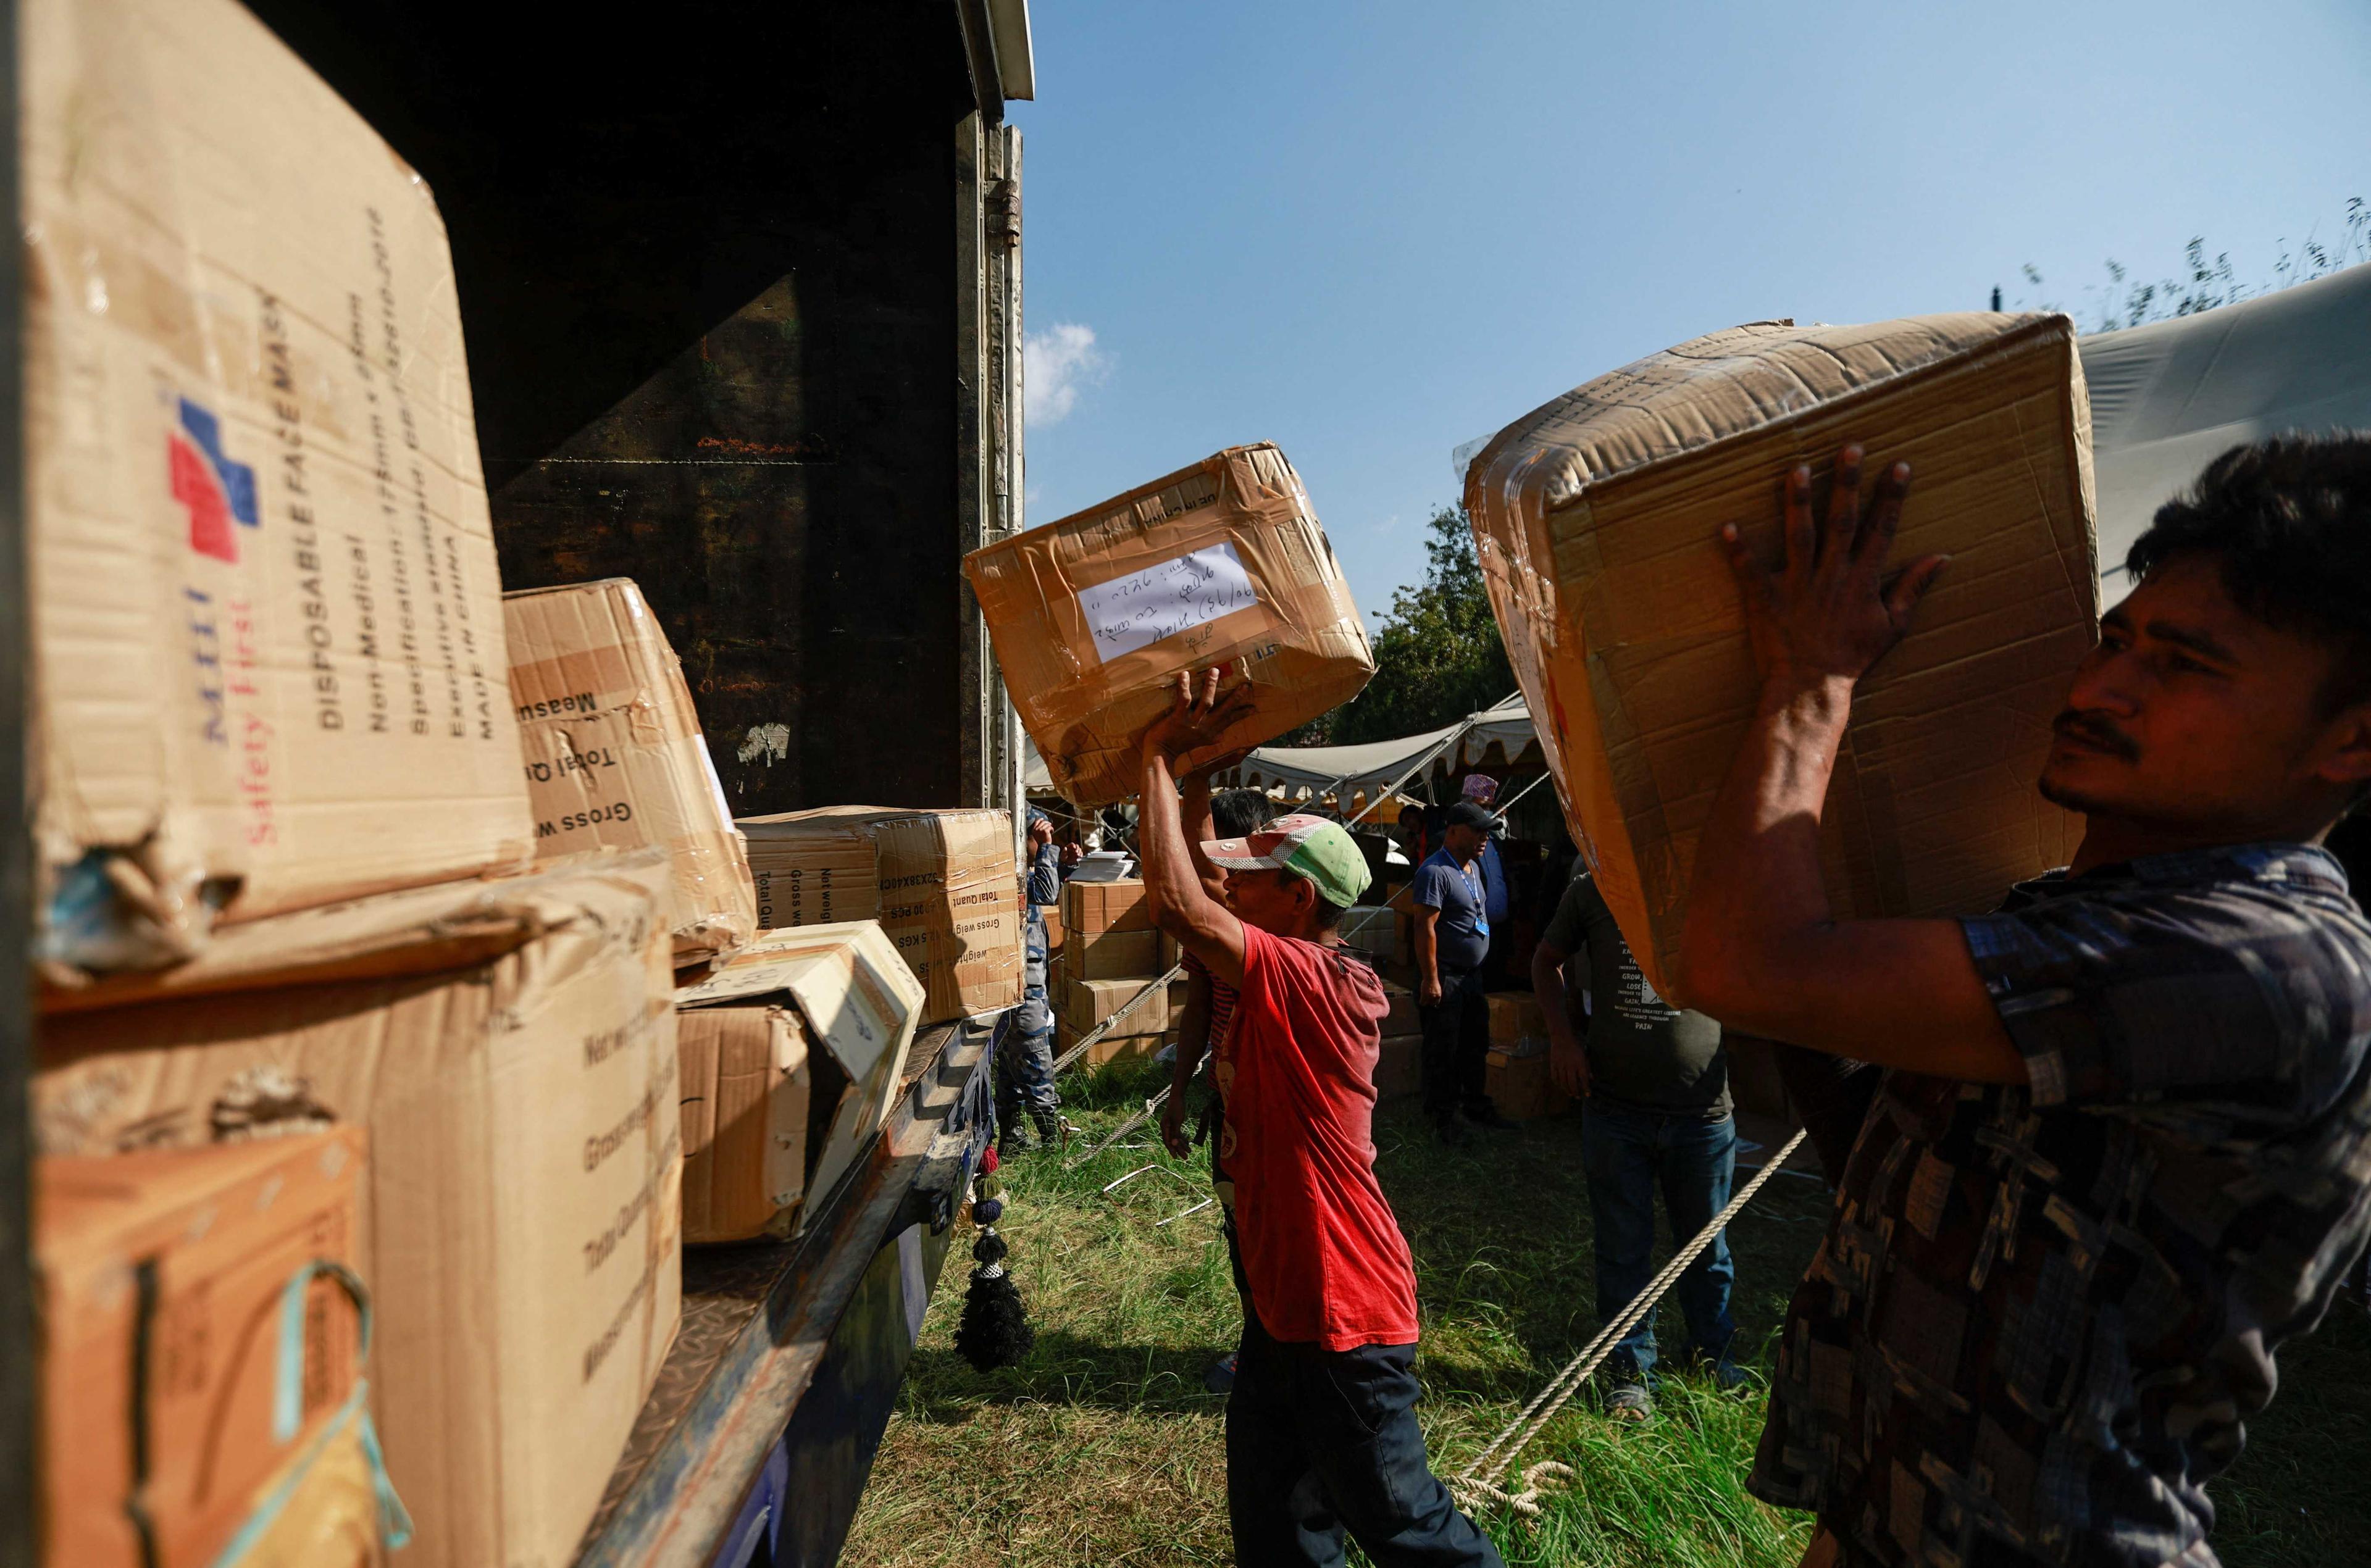 Men load boxes containing materials for the upcoming general election into a truck at the Election Commission in Kathmandu, Nepal Oct 31. Photo: Reuters